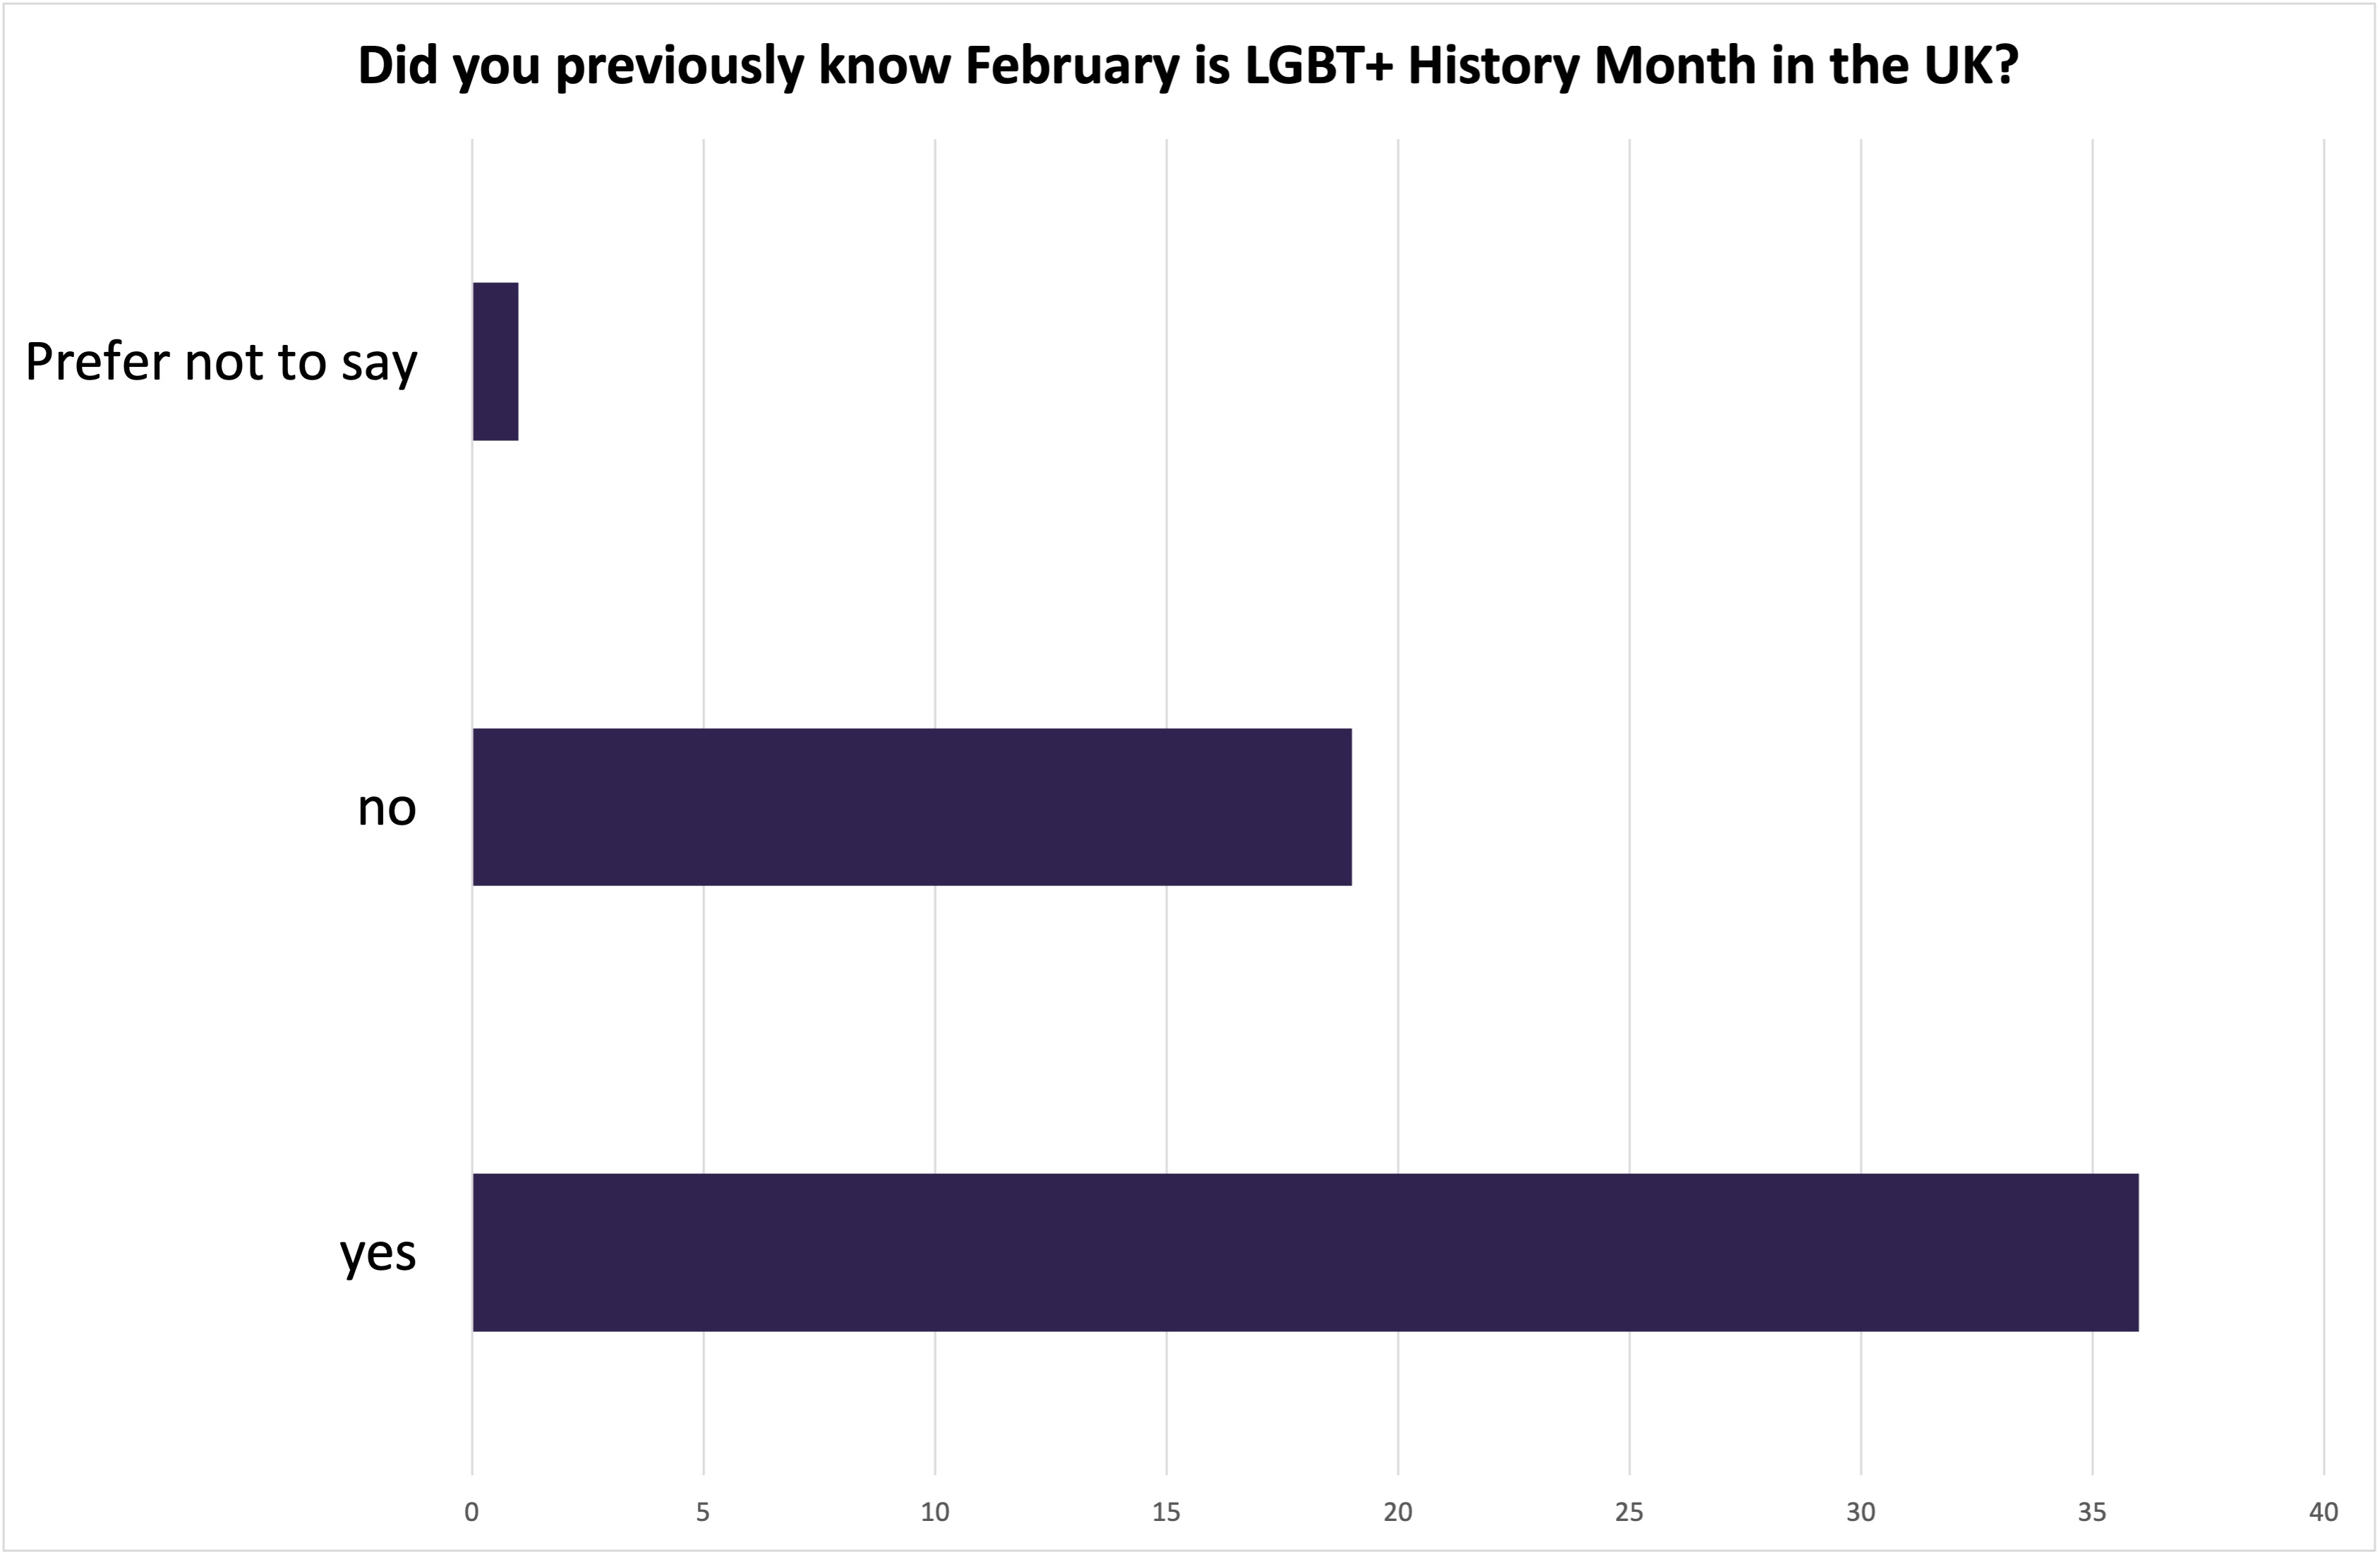 Bar chart of registrants' awareness of LGBTQ+ History Month: 36 were previously aware February is LGBTQ+ History Month in the UK; 19 were not; 1 preferred not to say.